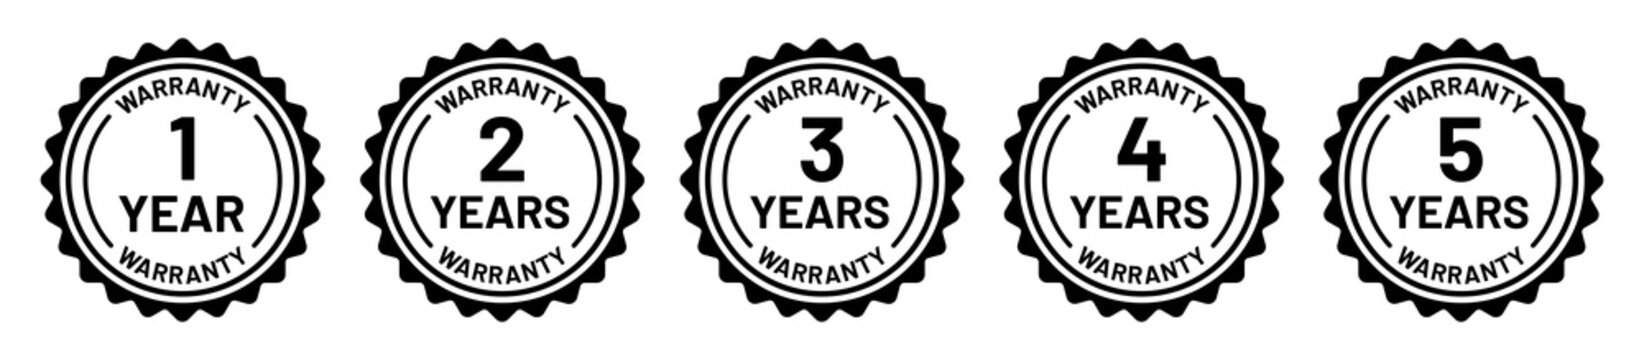 Warranty icon set, containing 1, 2, 3, 4 and 5 years seal guarantee certificate symbol isolated on white background.